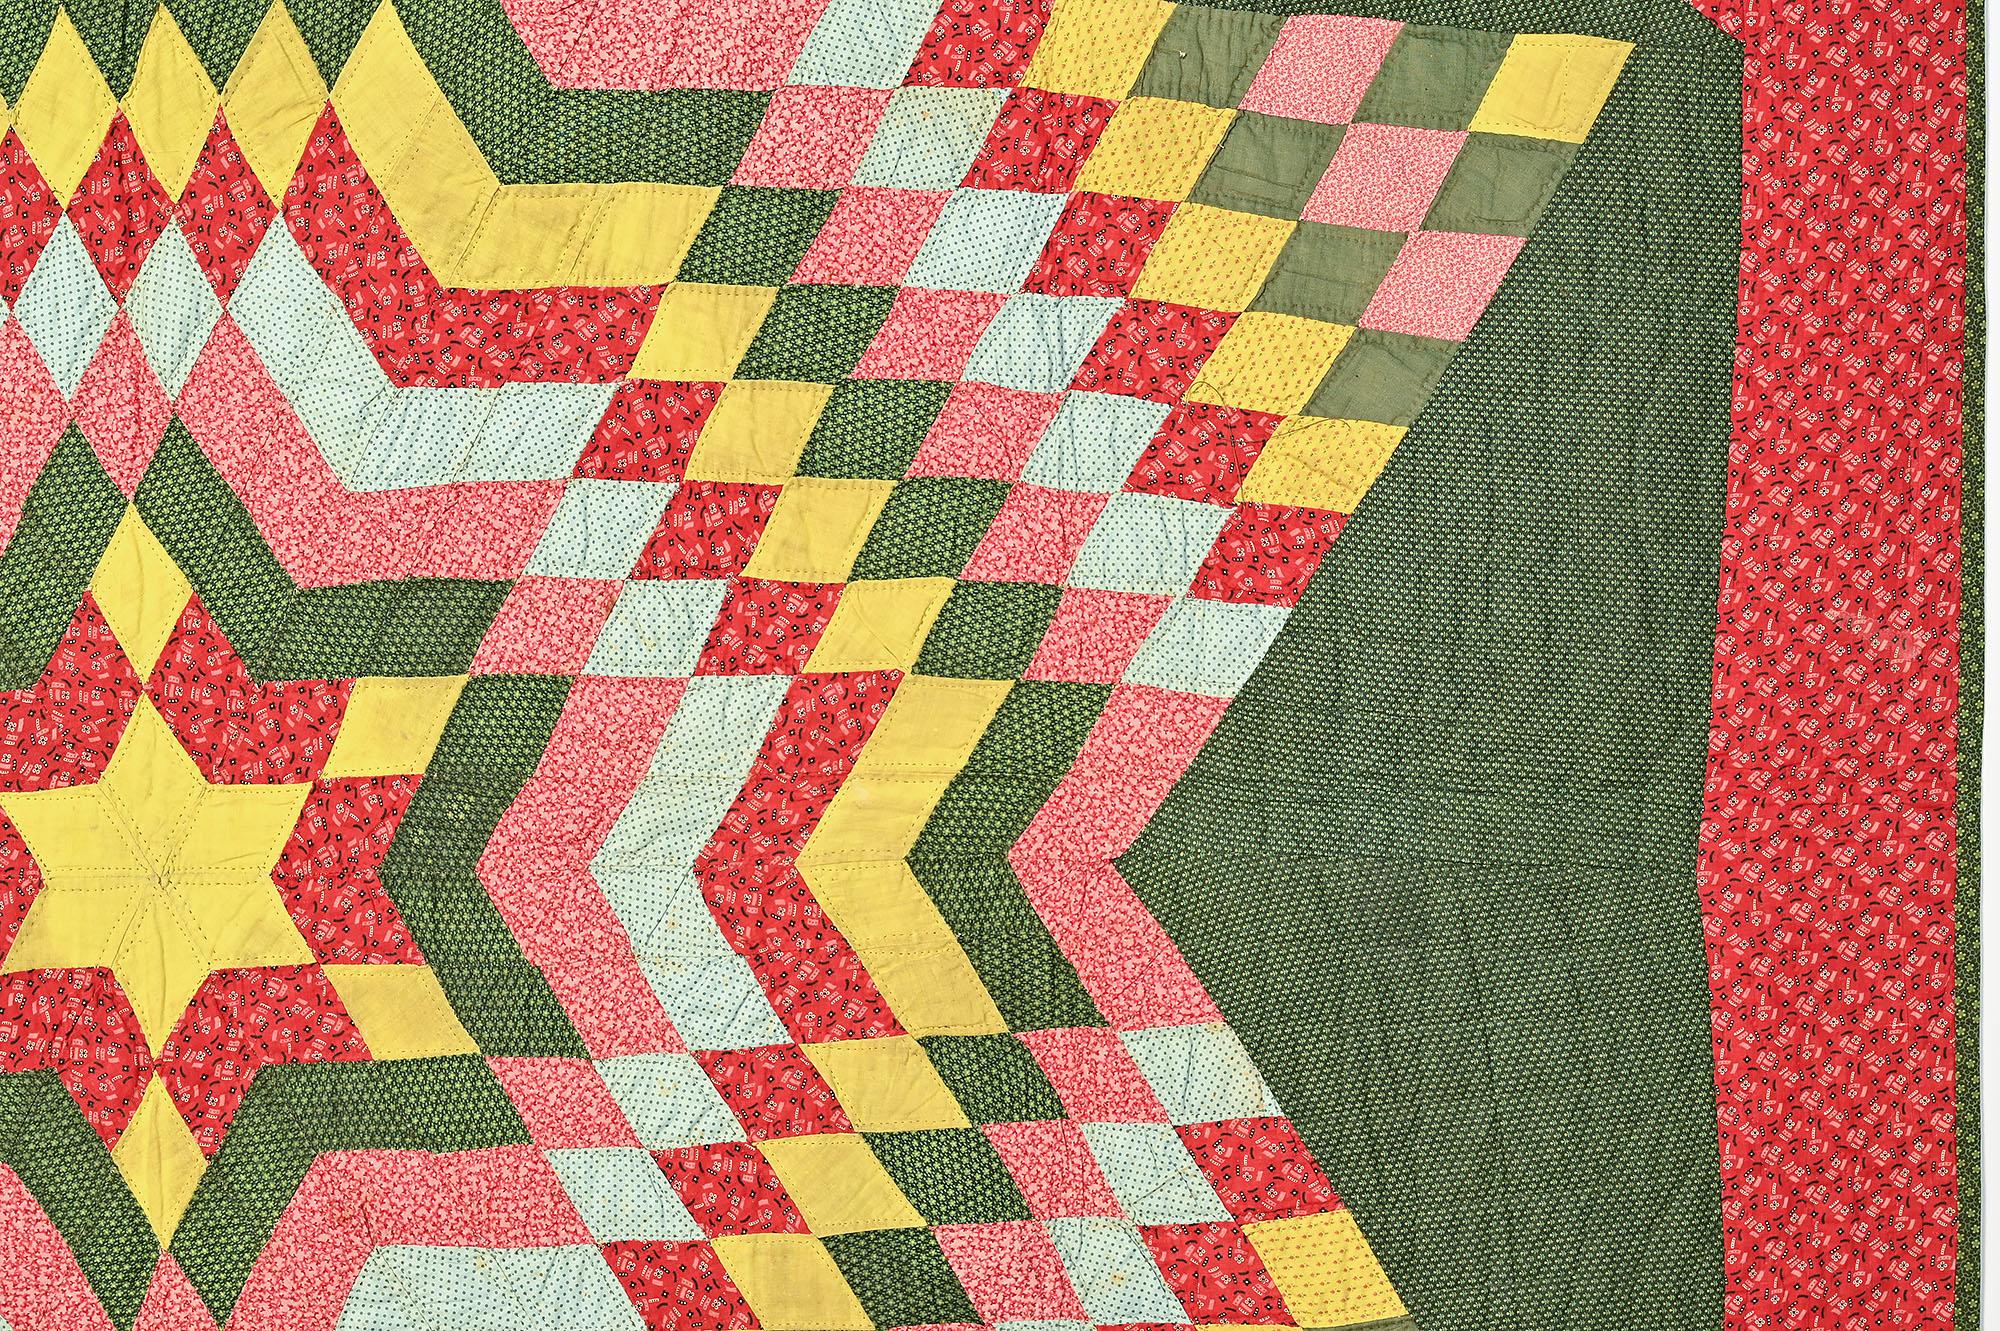 six pointed star quilt pattern